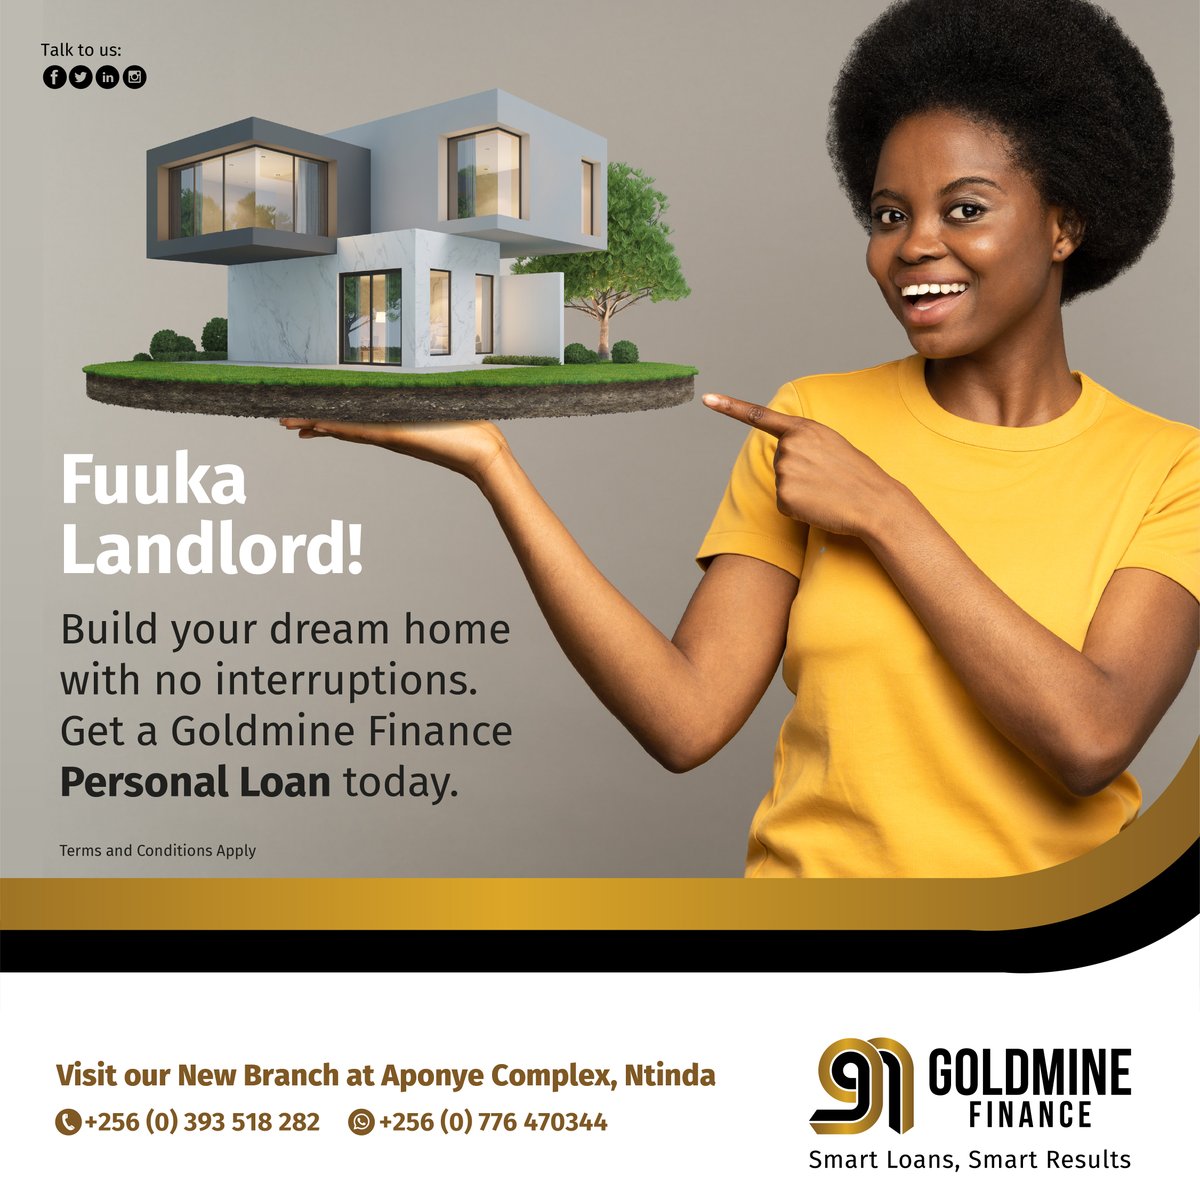 Imagine building your dream home with no hassle and no interruptions. 

#PersonalLoan #GoldmineFinance #SmartGoalsSmartResults